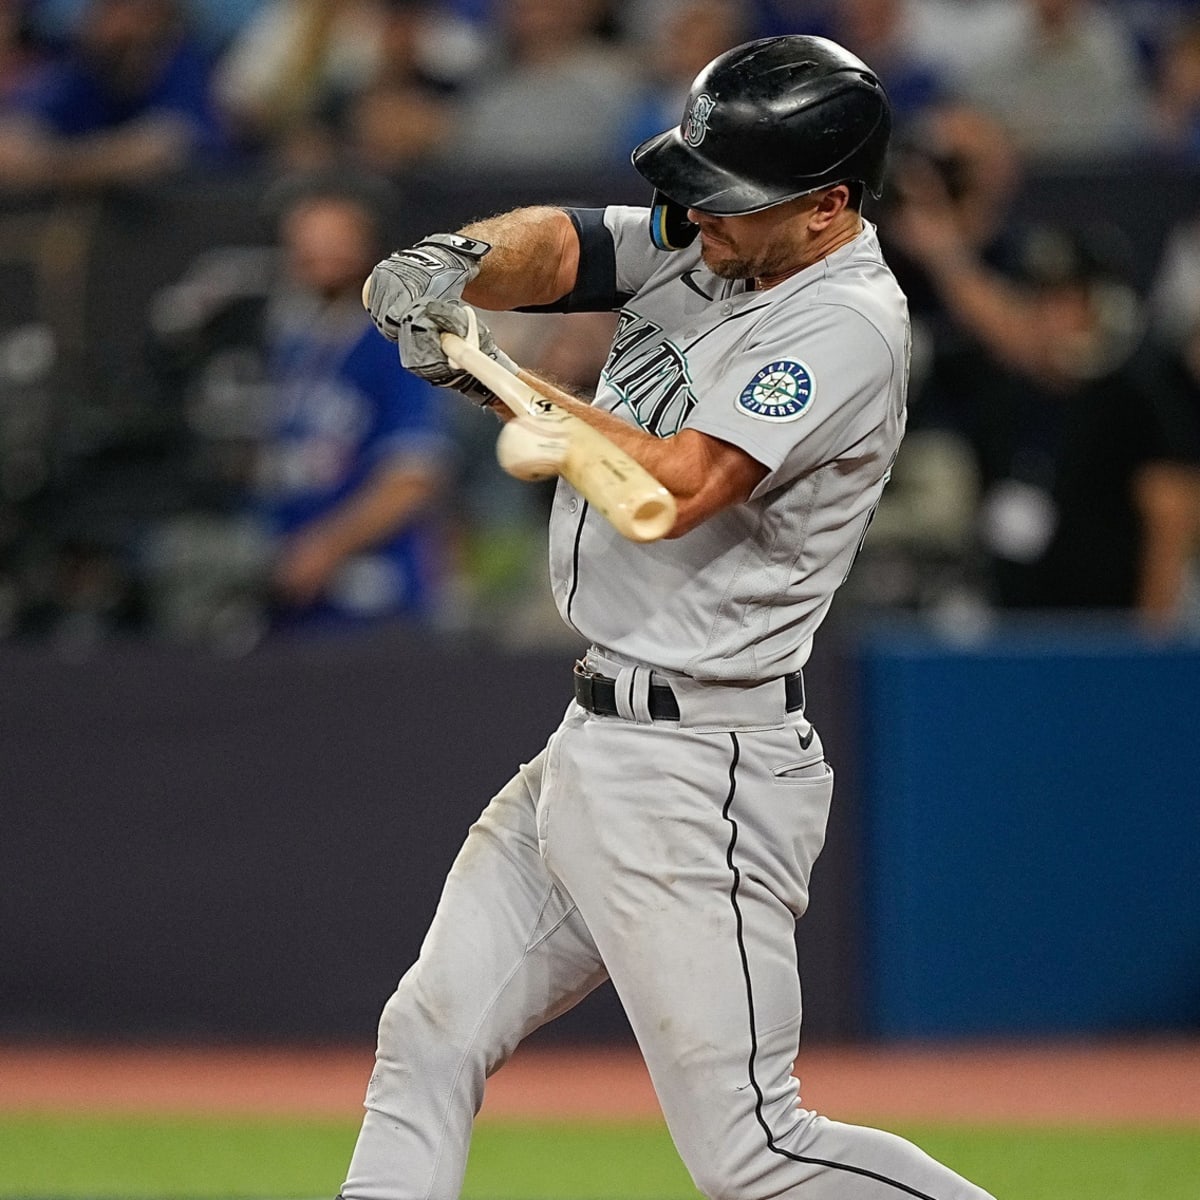 WATCH: Adam Frazier Hits Game-Winning Double to Send Mariners to ALDS -  Fastball